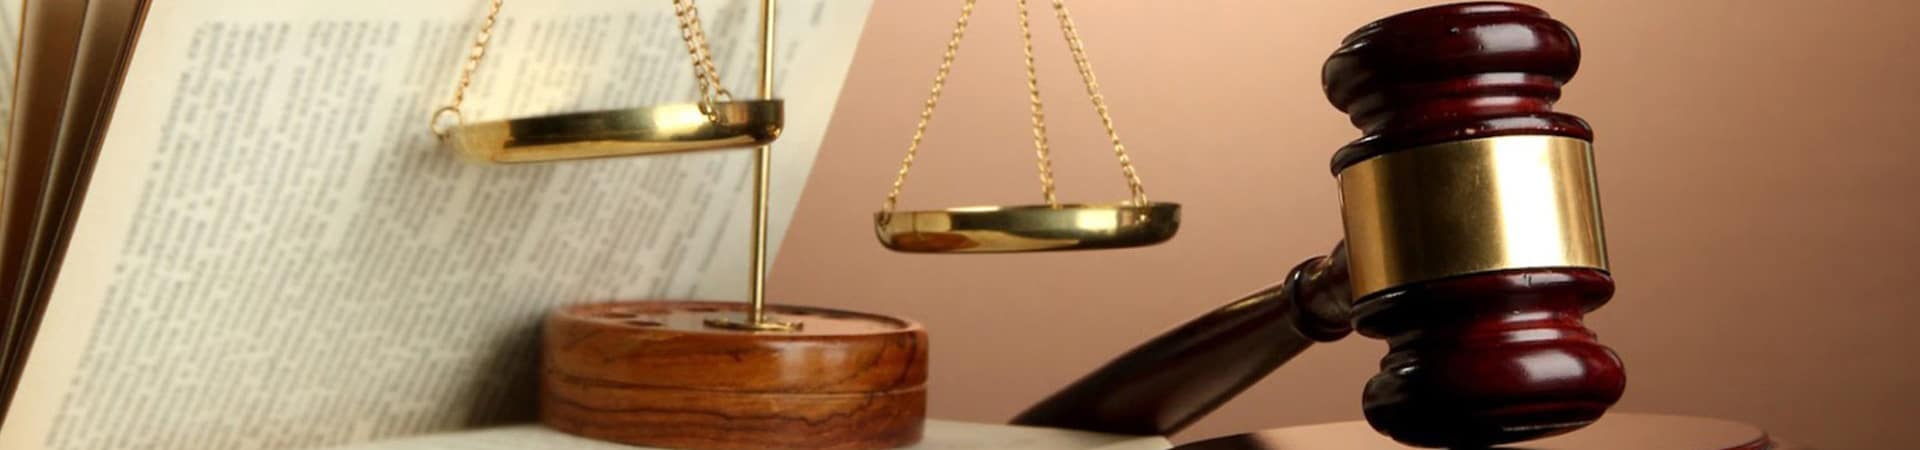 Legal Scale and gavel